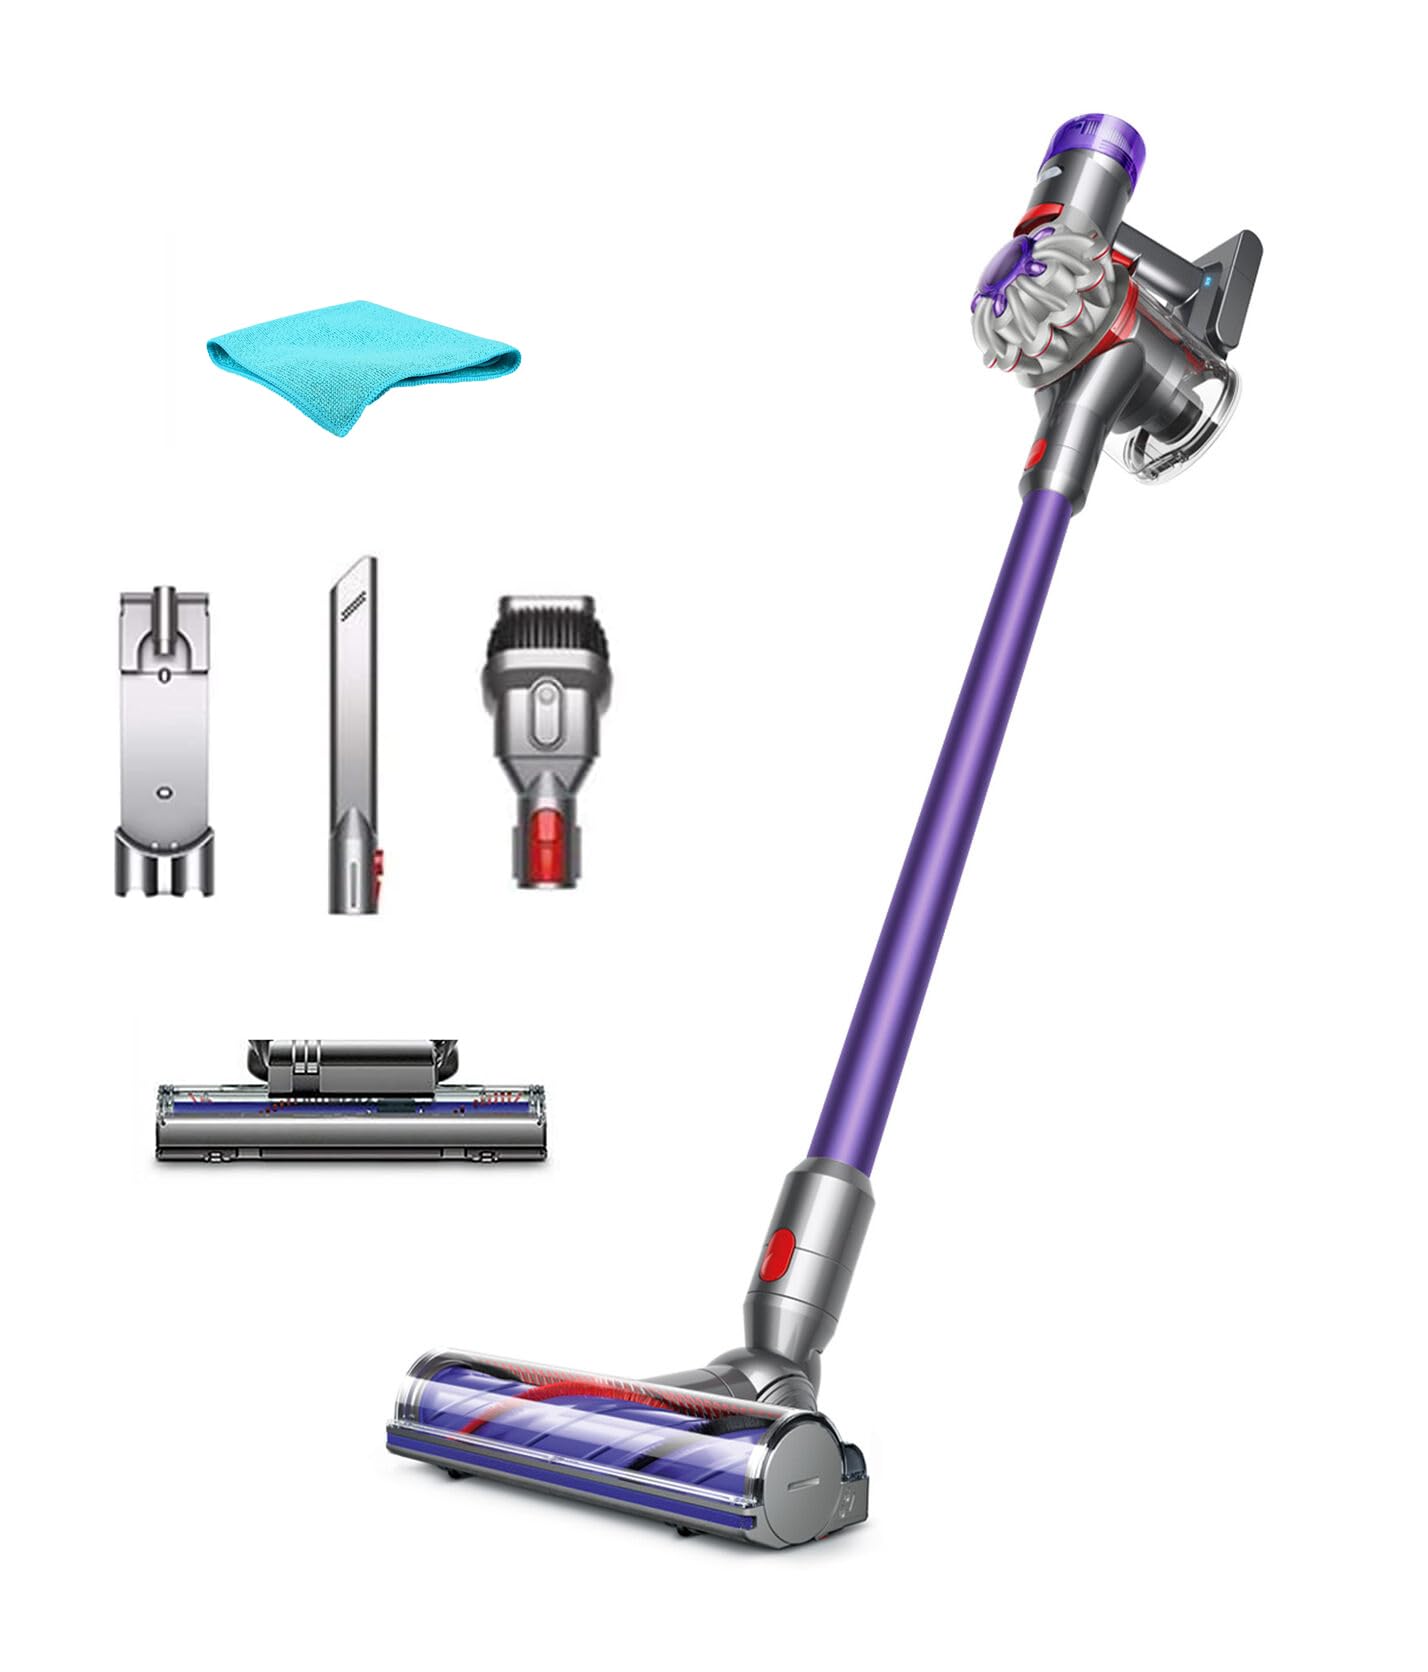 Dyson V8 Origin+ Cordless Stick Vacuum Cleaner | Purple, HEPA Filter, Rotating Brushes, Bagless, Telescopic Handle, Battery Operated, Up to 40 Min Runtime, 2-Year Warranty, with 5AVE Microfiber Cloth